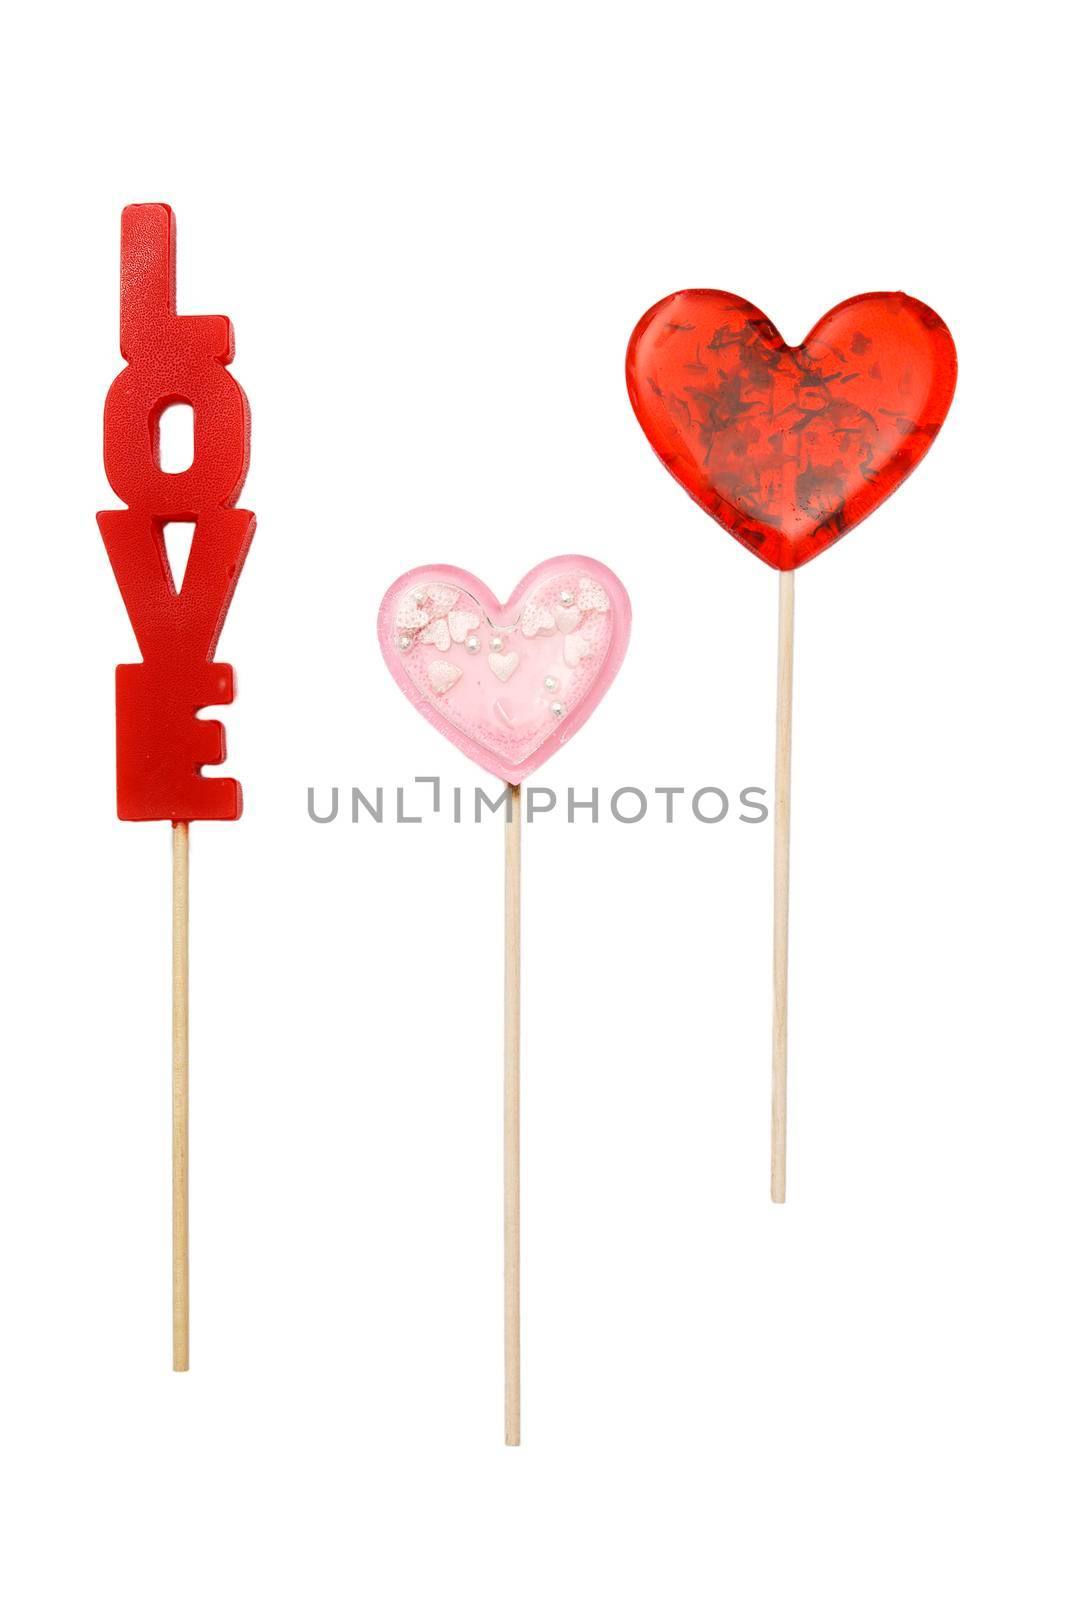 red heart shaped lollipop with herbs and pink star lollipop inside on a stick isolated on white. Gift for Valentine's Day. square format by elenarostunova